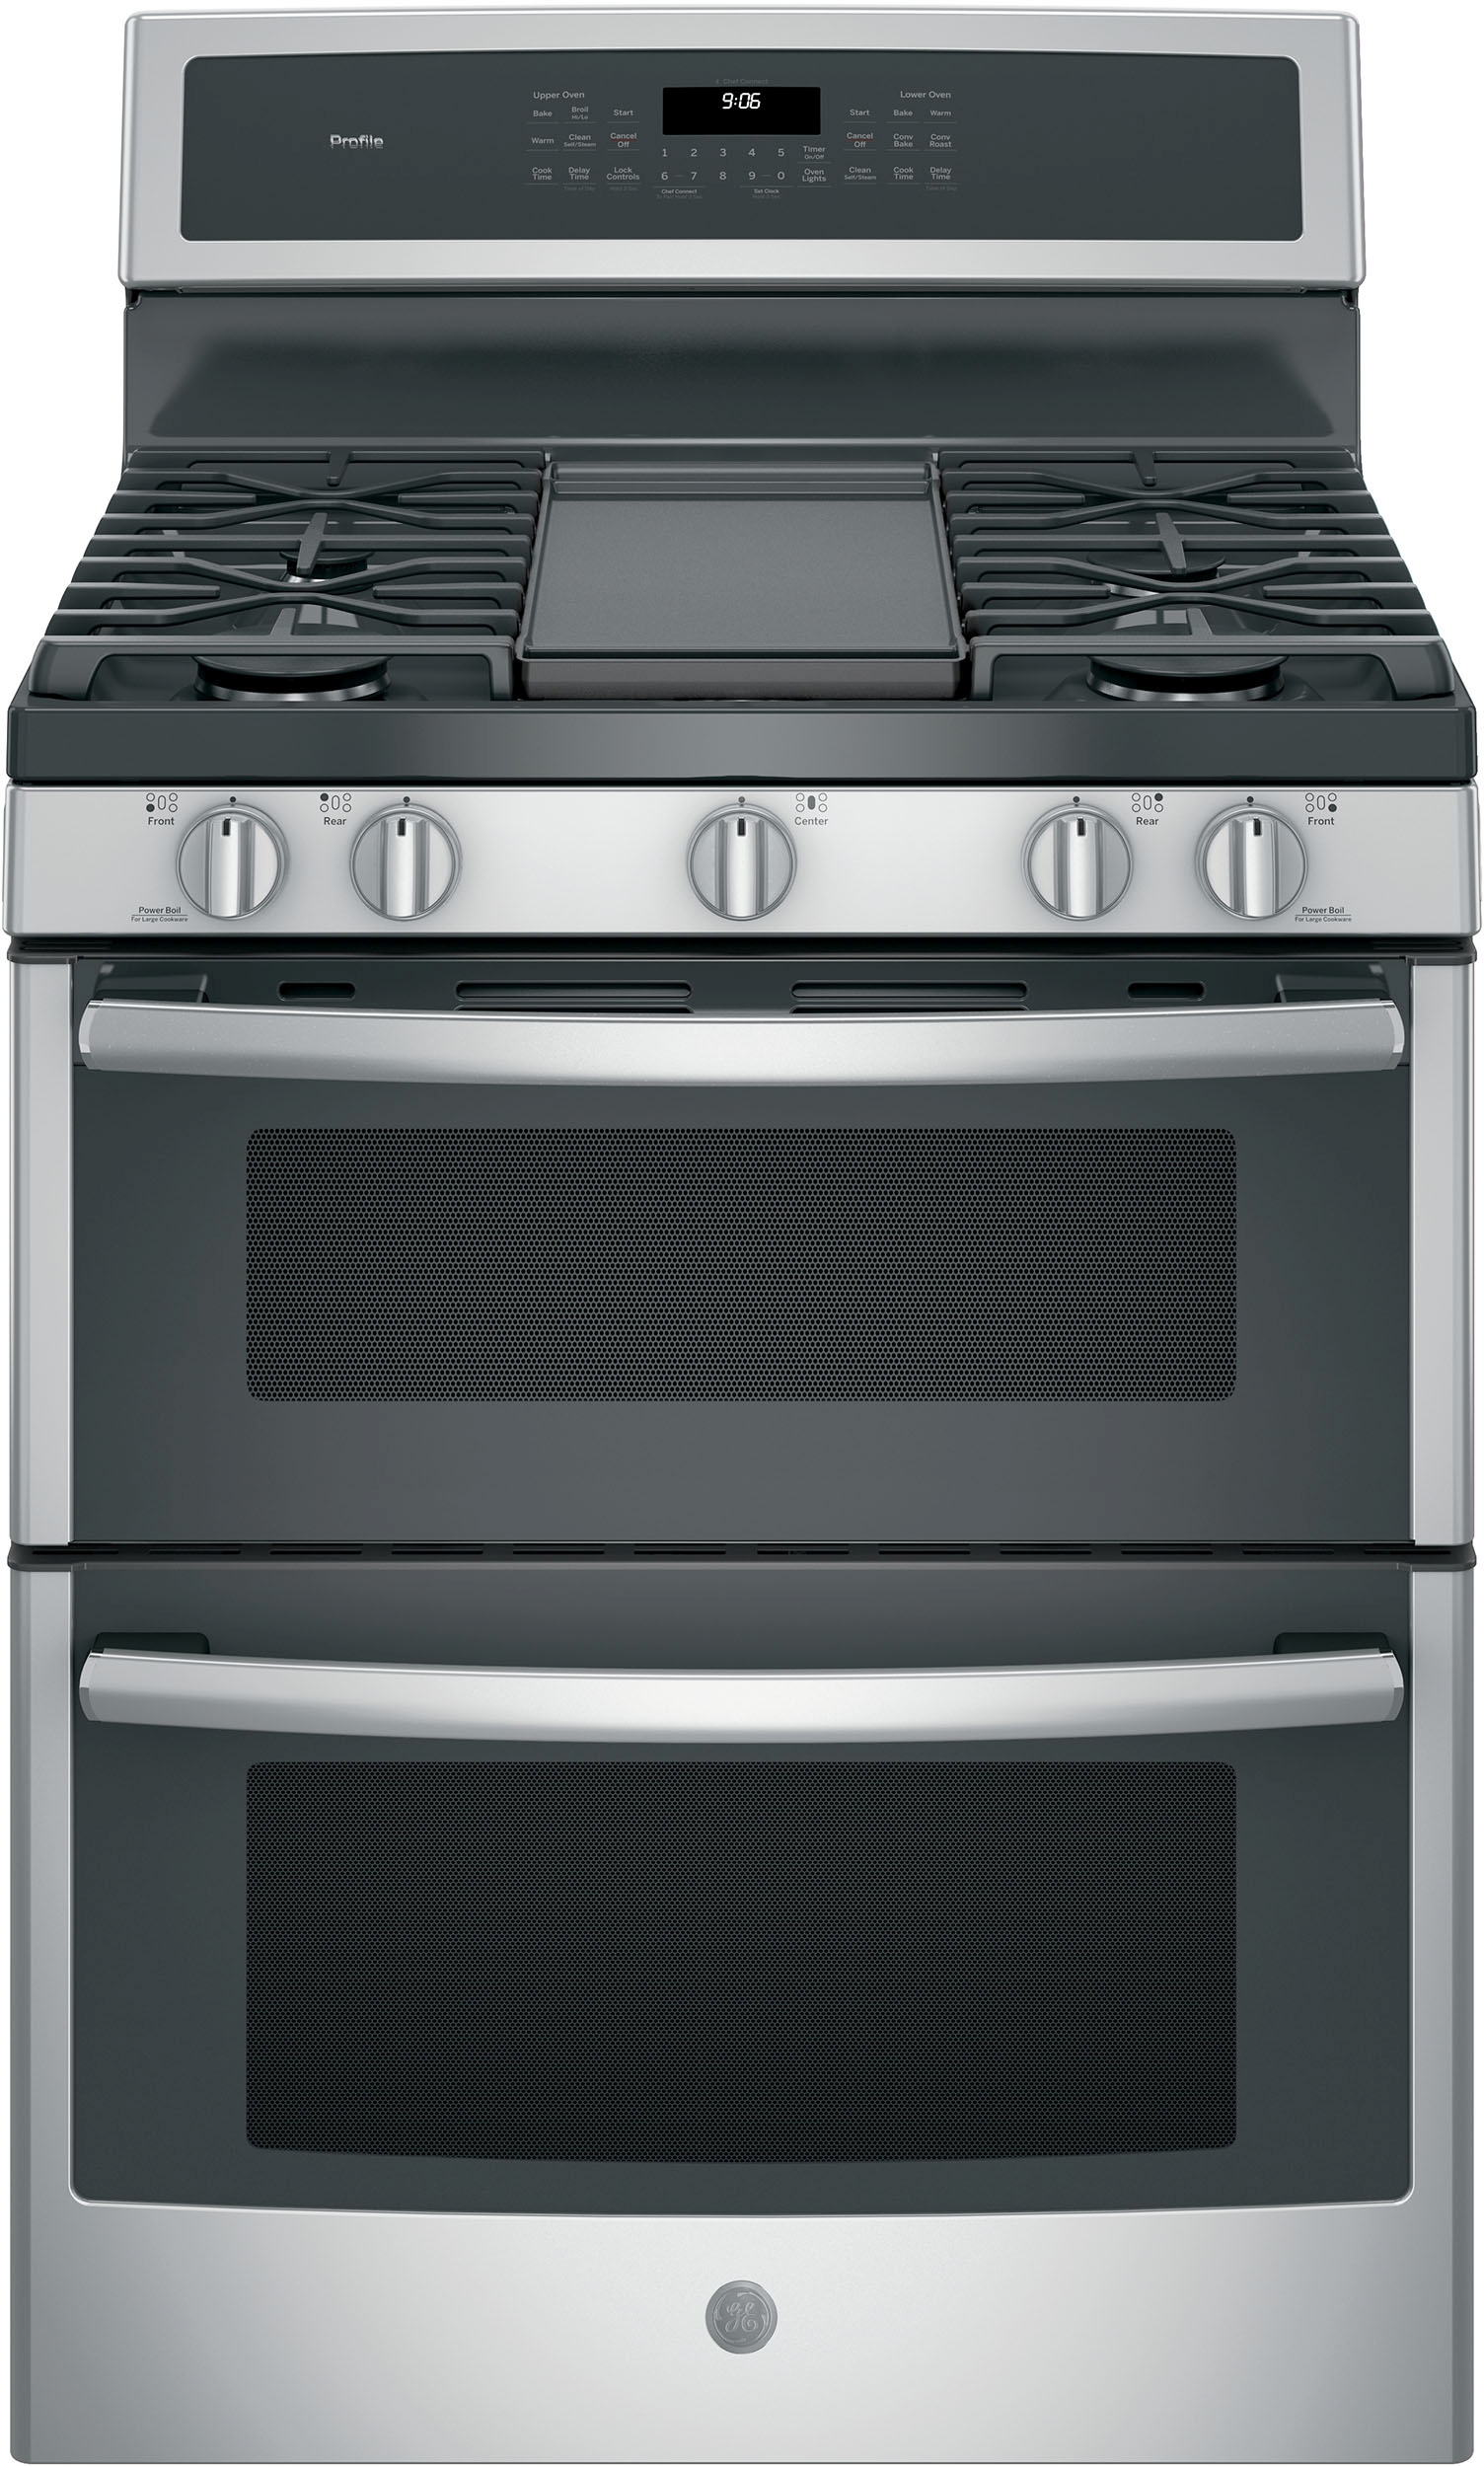 GE Profile™ Series 30" Stainless Steel Free Standing Gas Double Oven Convection Range